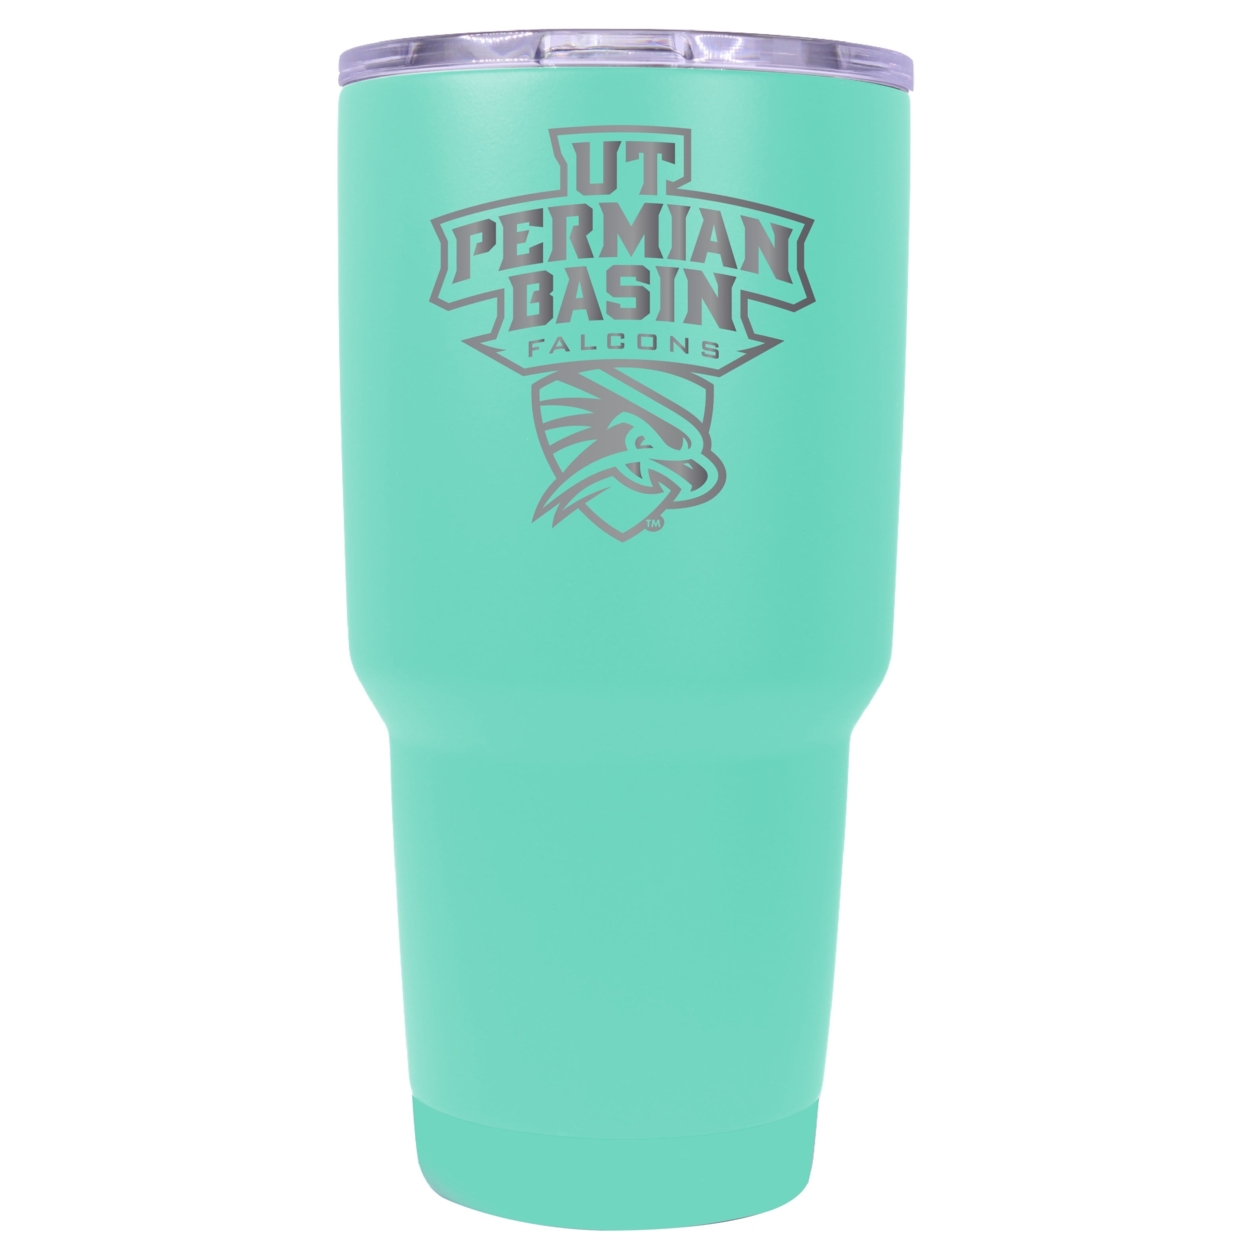 University Of Texas Of The Permian Basin 24 Oz Laser Engraved Stainless Steel Insulated Tumbler - Choose Your Color. - Seafoam